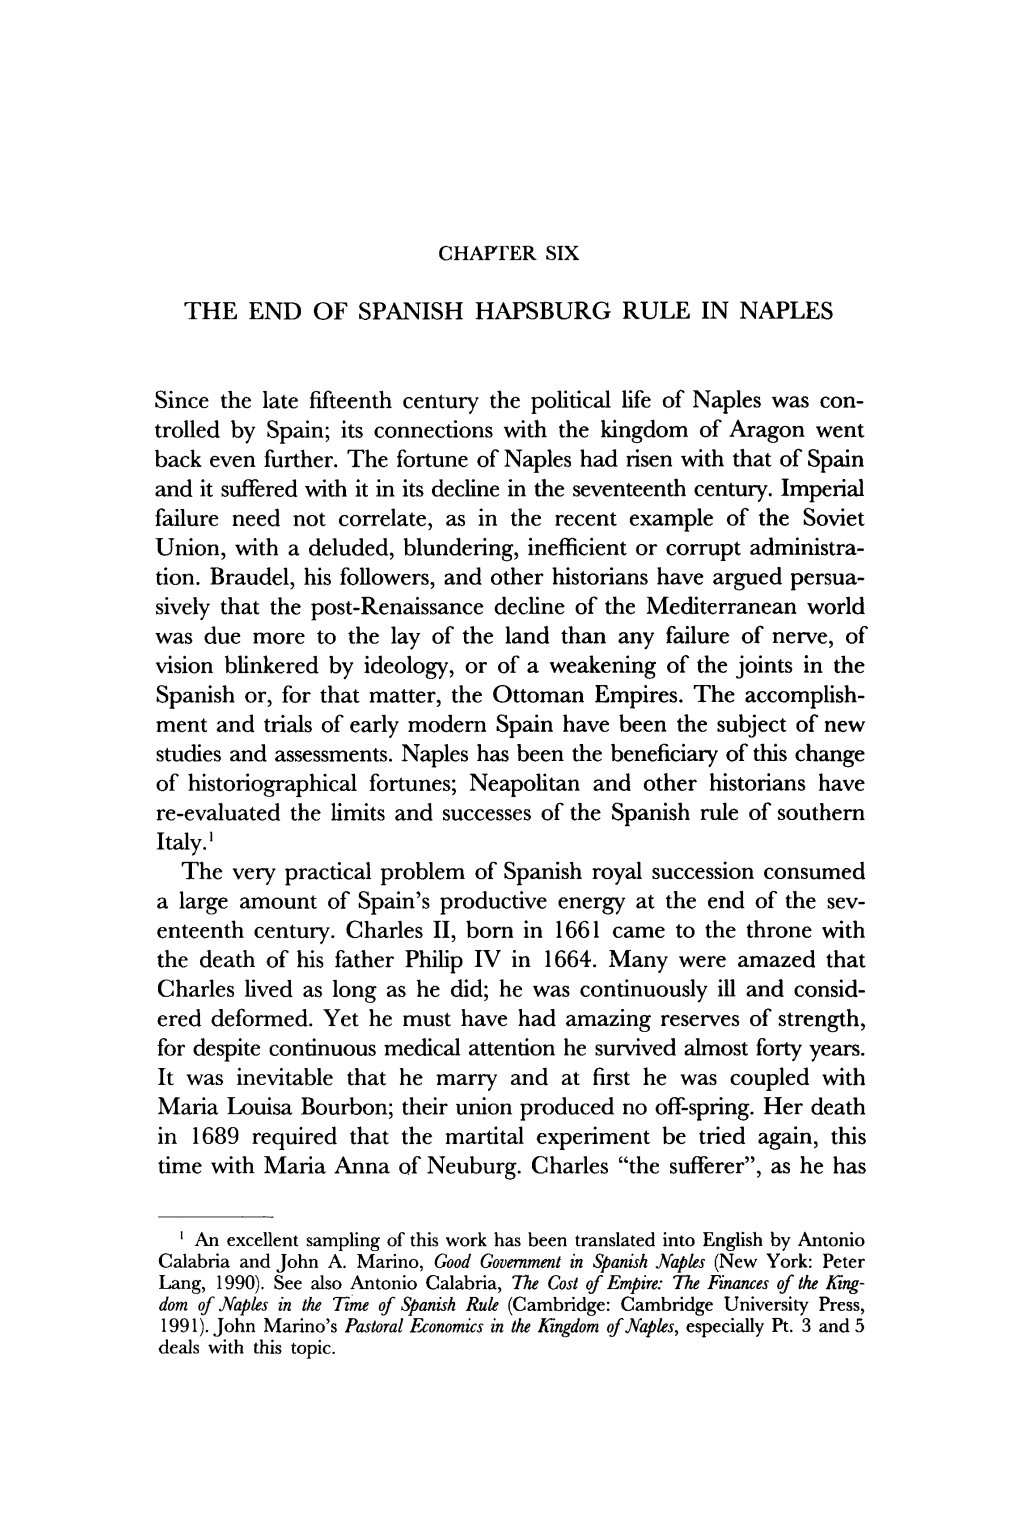 The End of Spanish Hapsburg Rule in Naples